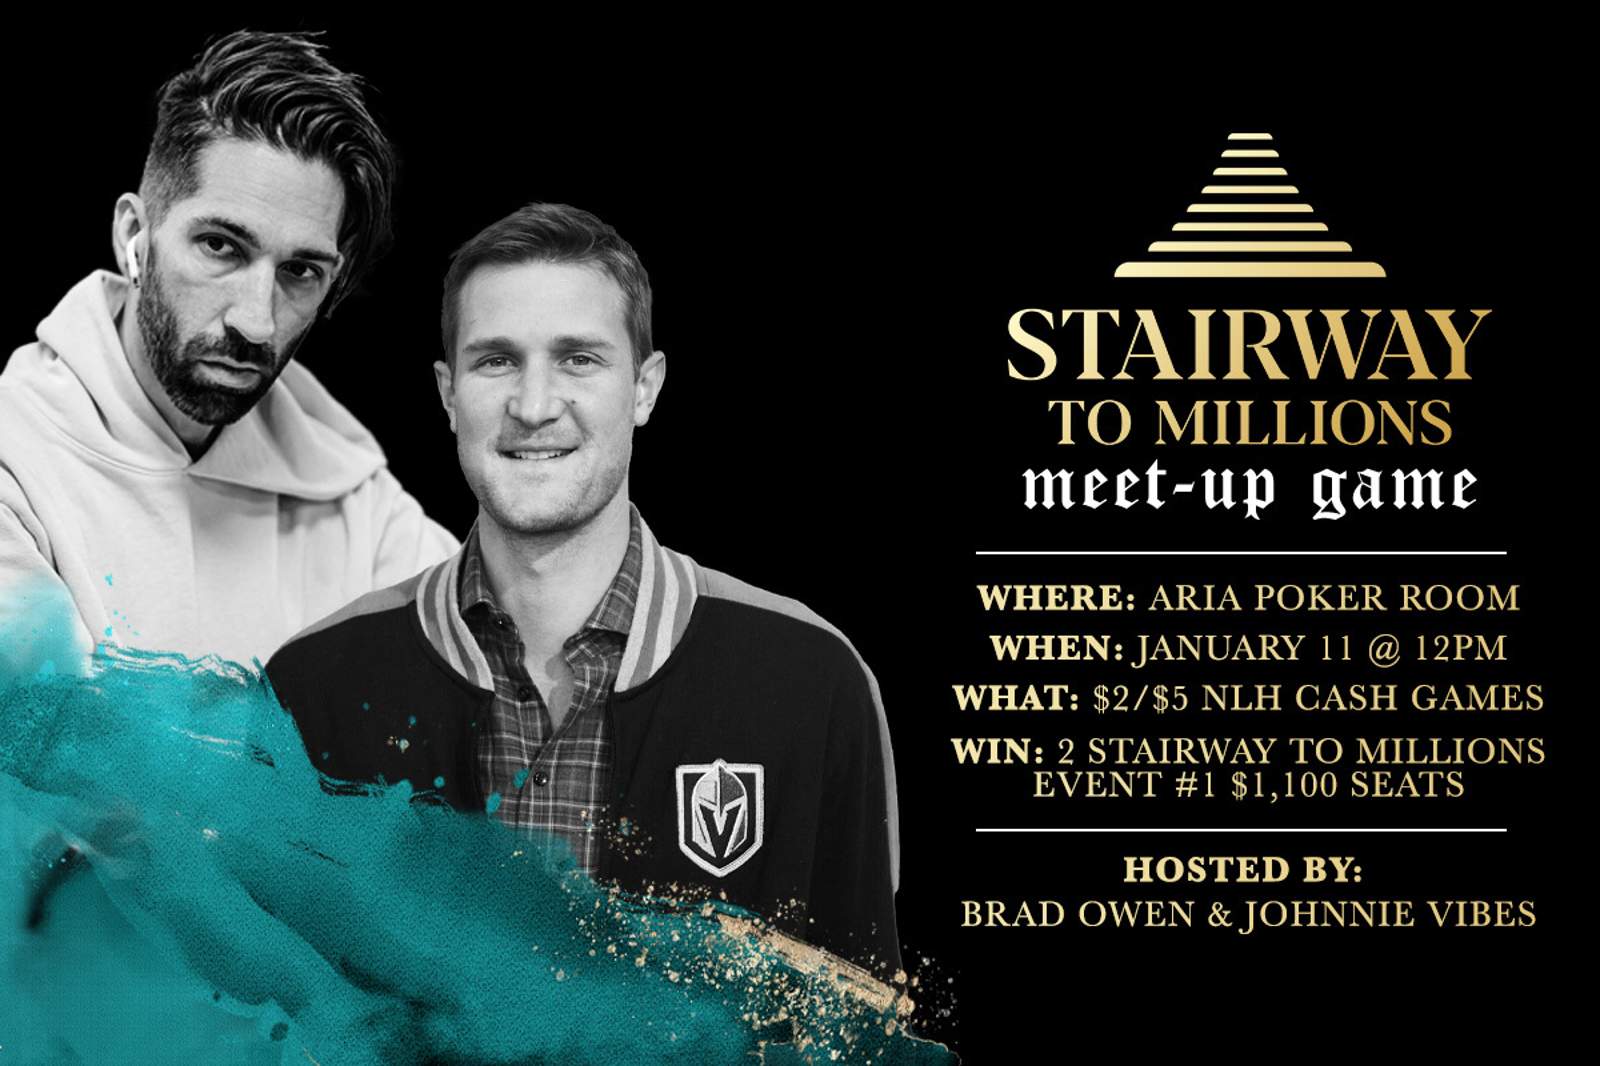 Join Brad Owen and Johnnie "Vibes" Moreno at the PokerGO® Stairway To Millions Meet-Up Game at ARIA Resort & Casino